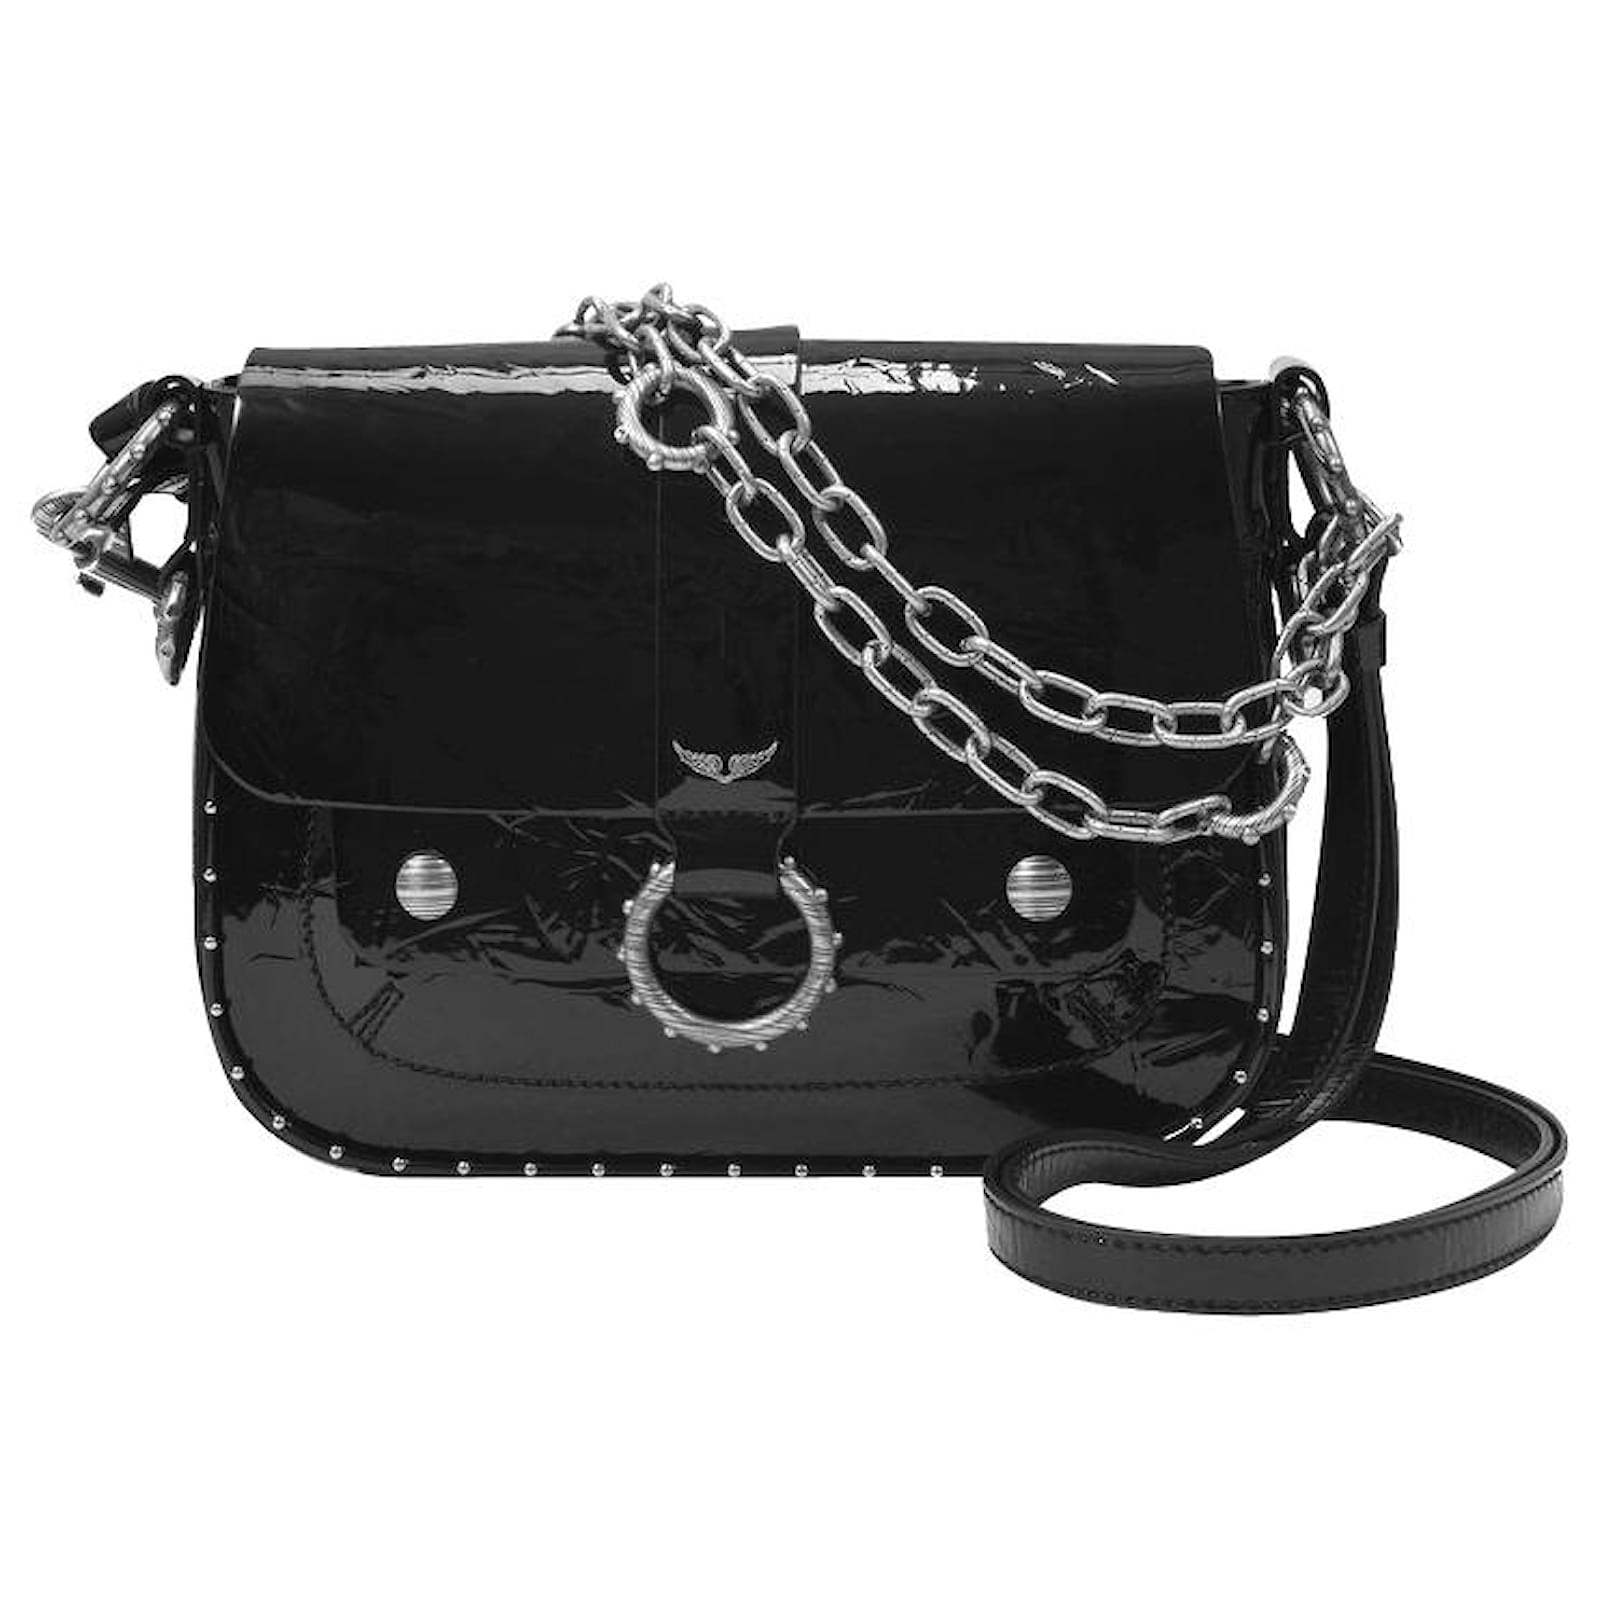 Zadig & Voltaire, Bags, Zadig Voltaire Kate Wrinkled Bag In Black Leather